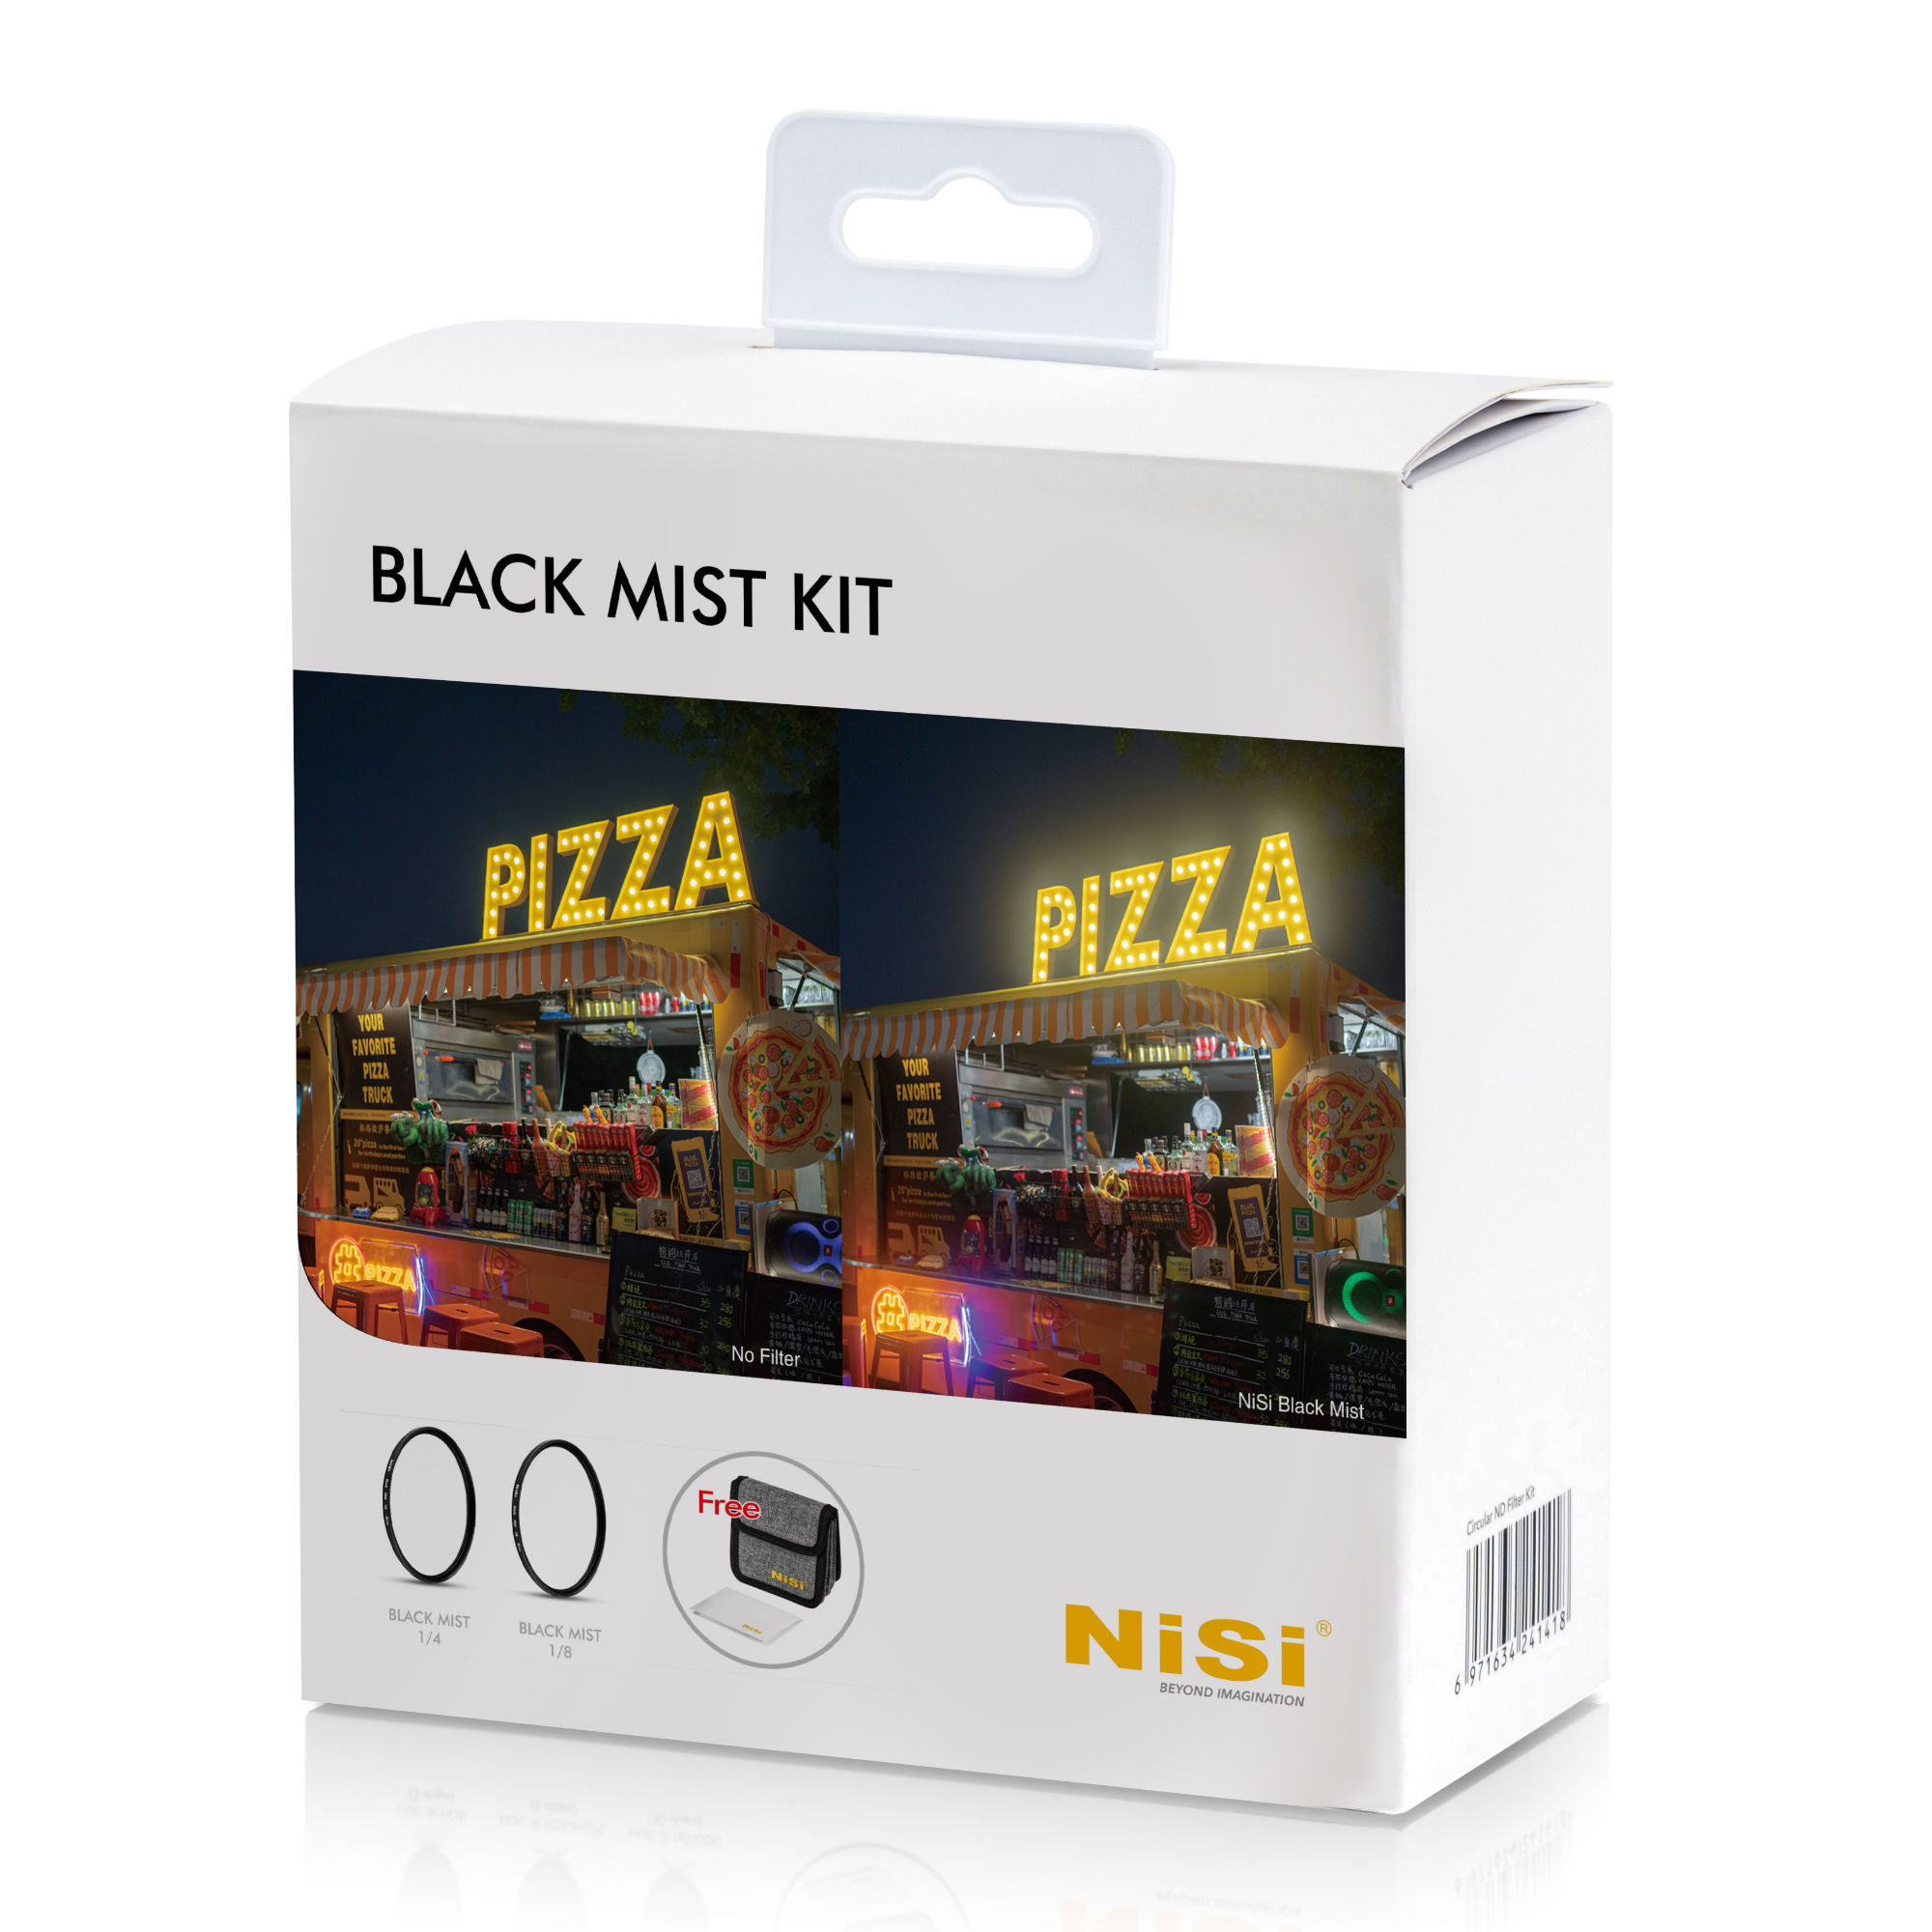 NiSi Black Mist Kit with 1/4, 1/8 and Case (46mm)